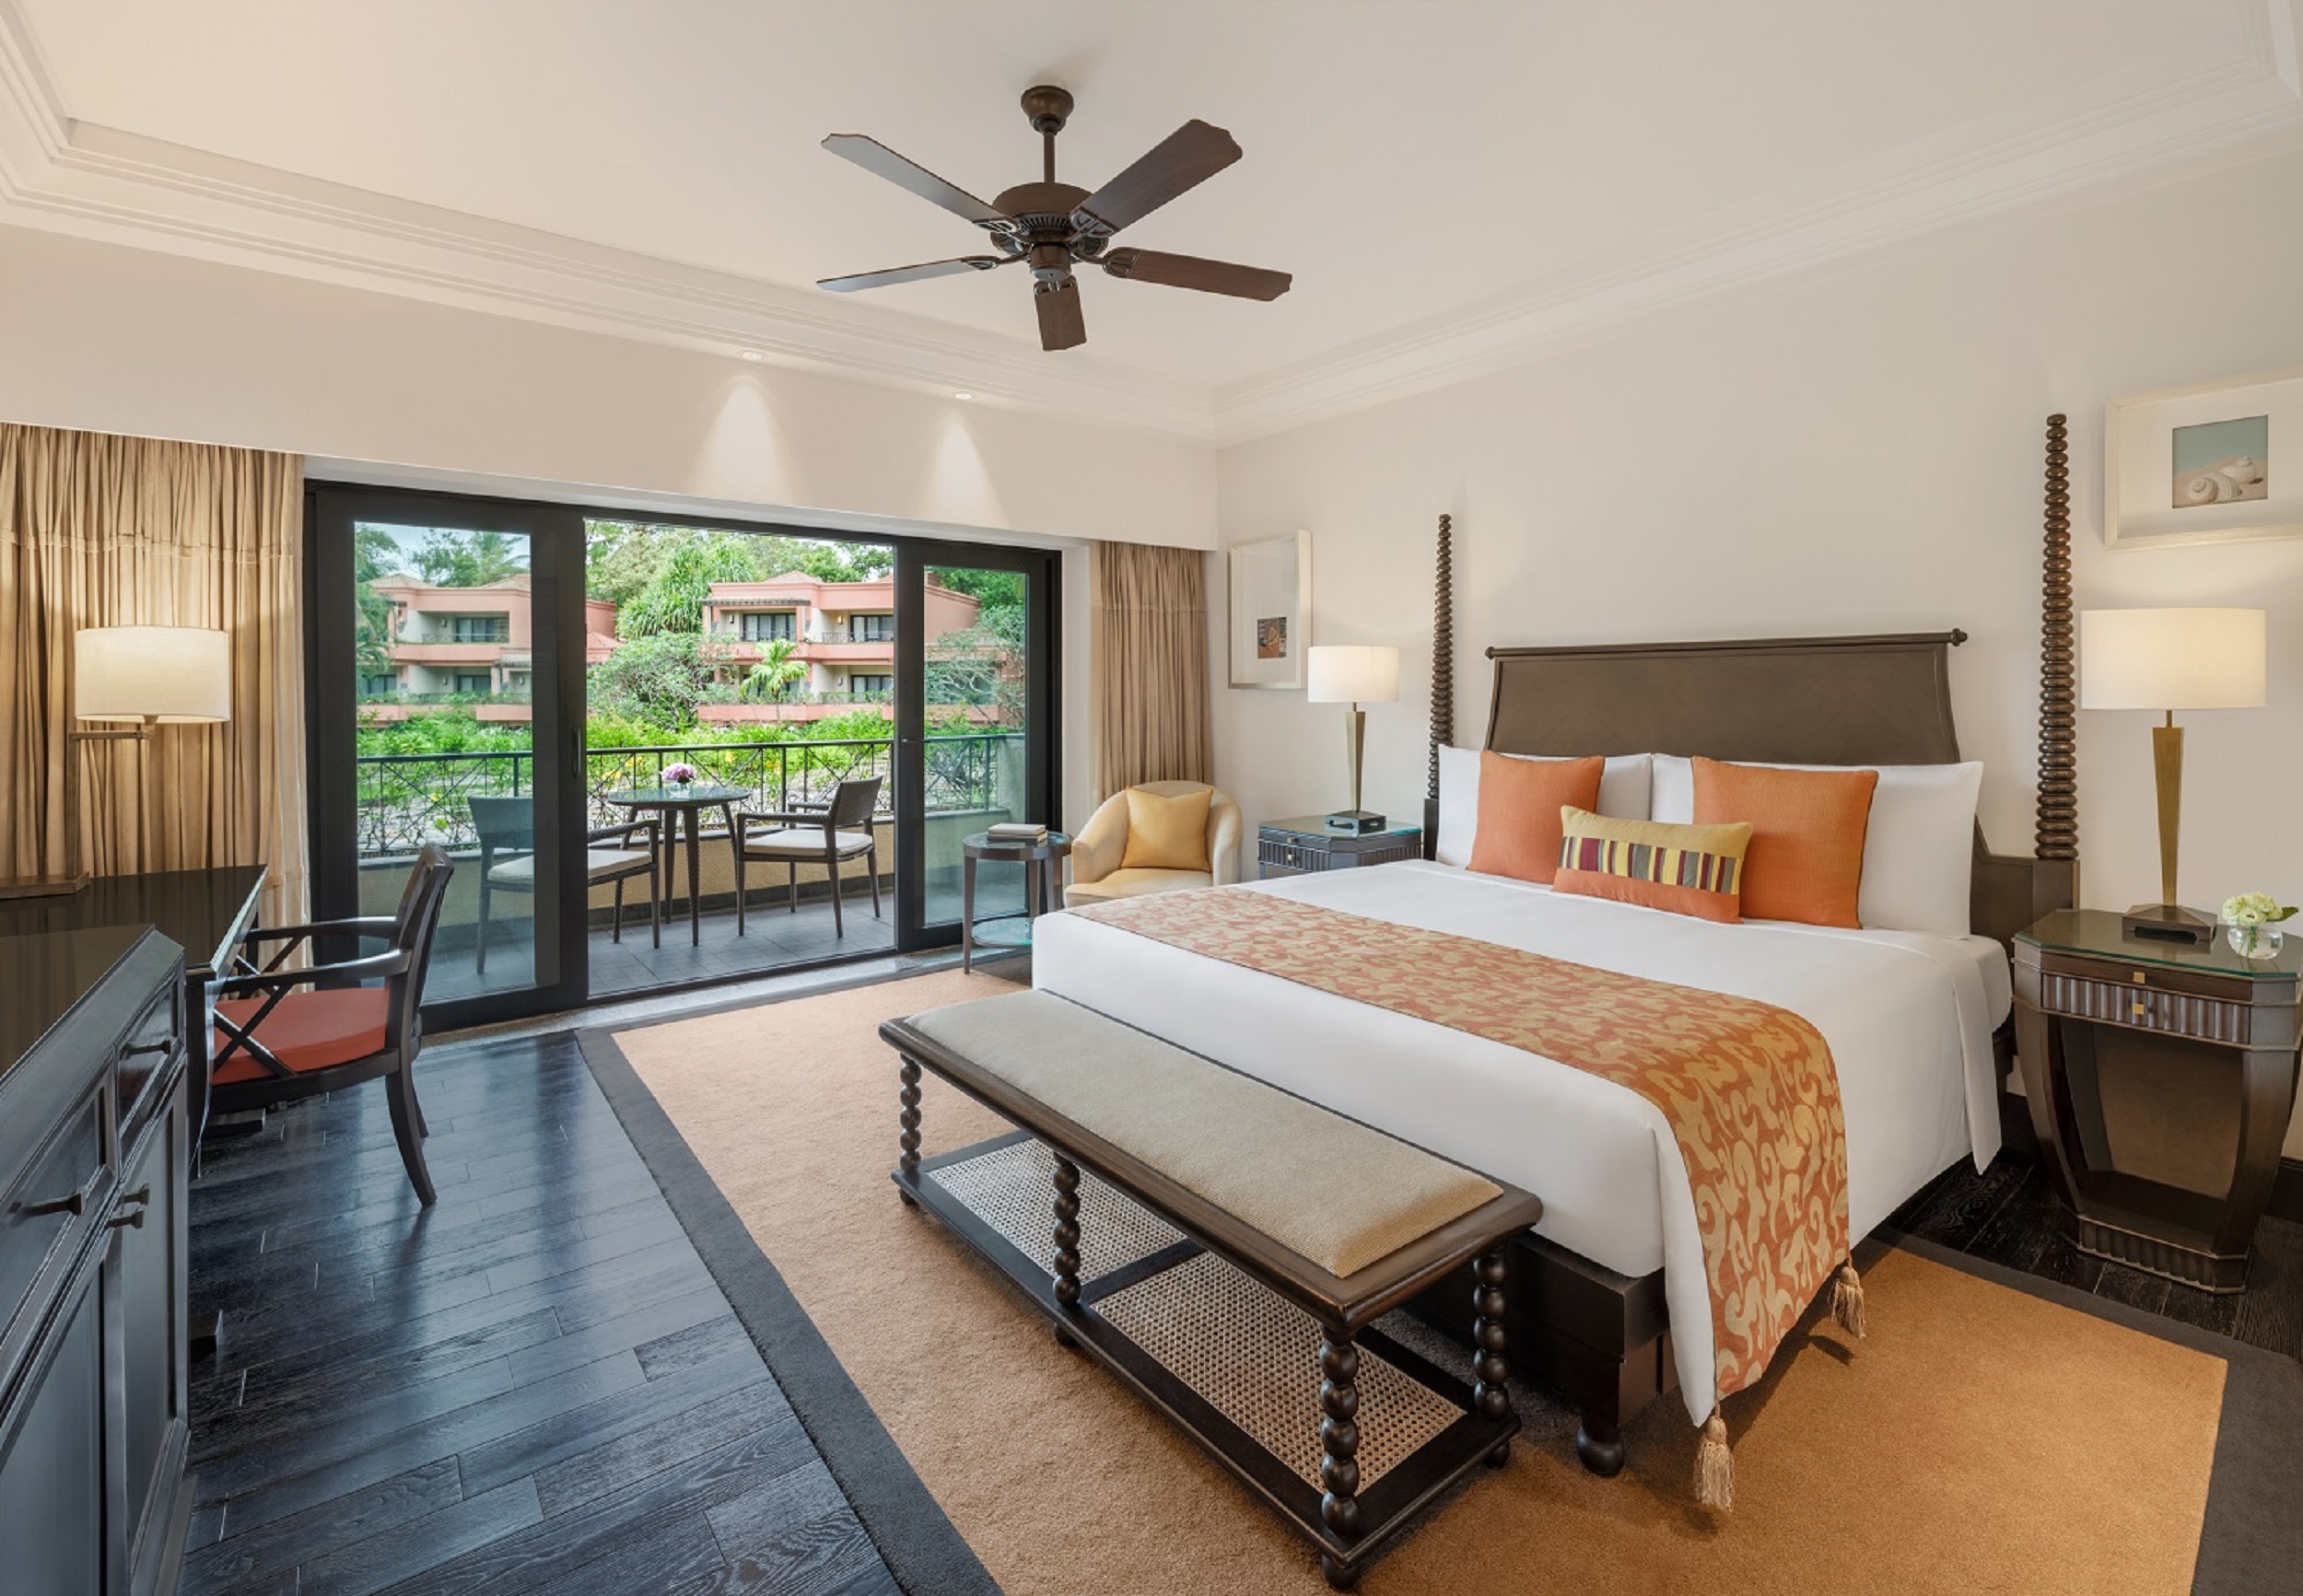 St. Regis Hotels and Resorts announces the opening of The St. Regis Goa Resort